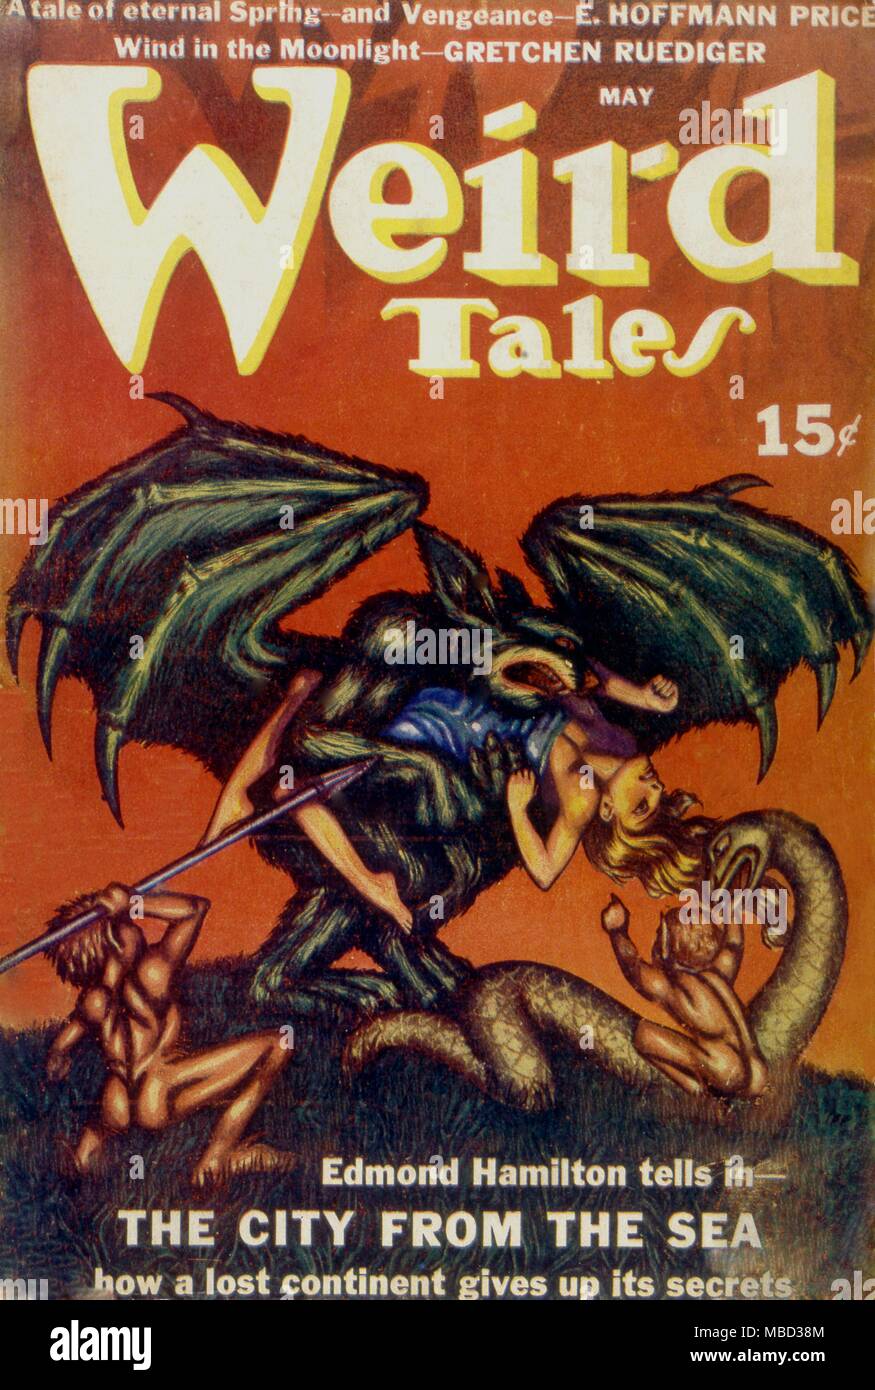 Science Fiction and Horror Magazines. Cover of Weird Tales, May 1940. Artwork by Hannes Bok. Stock Photo